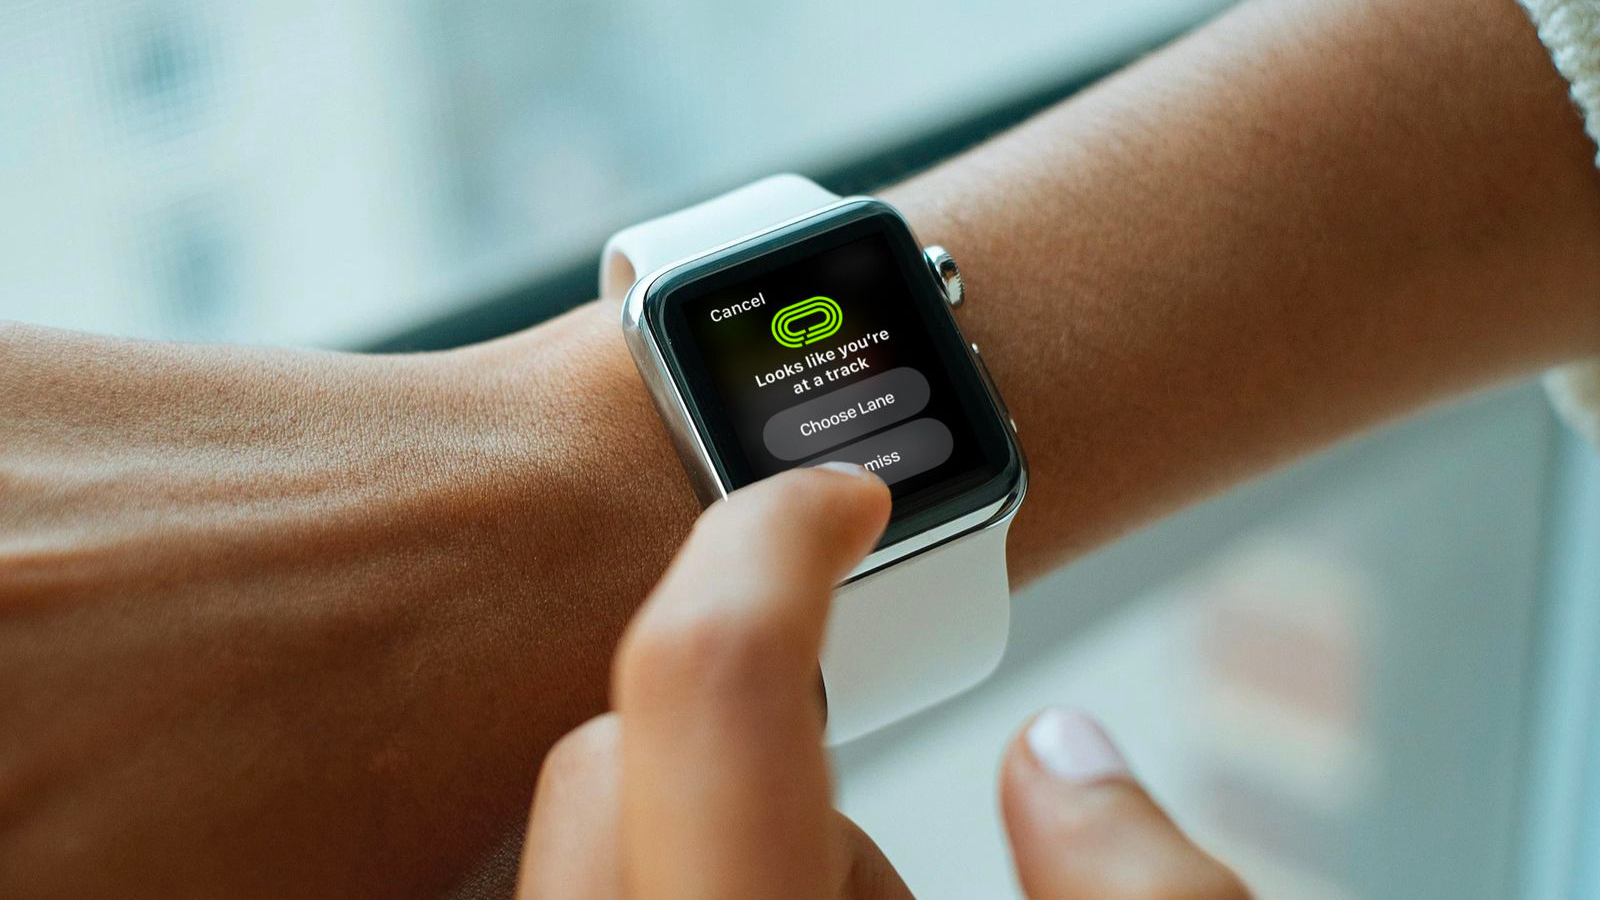 Track stress with Apple Watch – is the wearable ready? - 9to5Mac